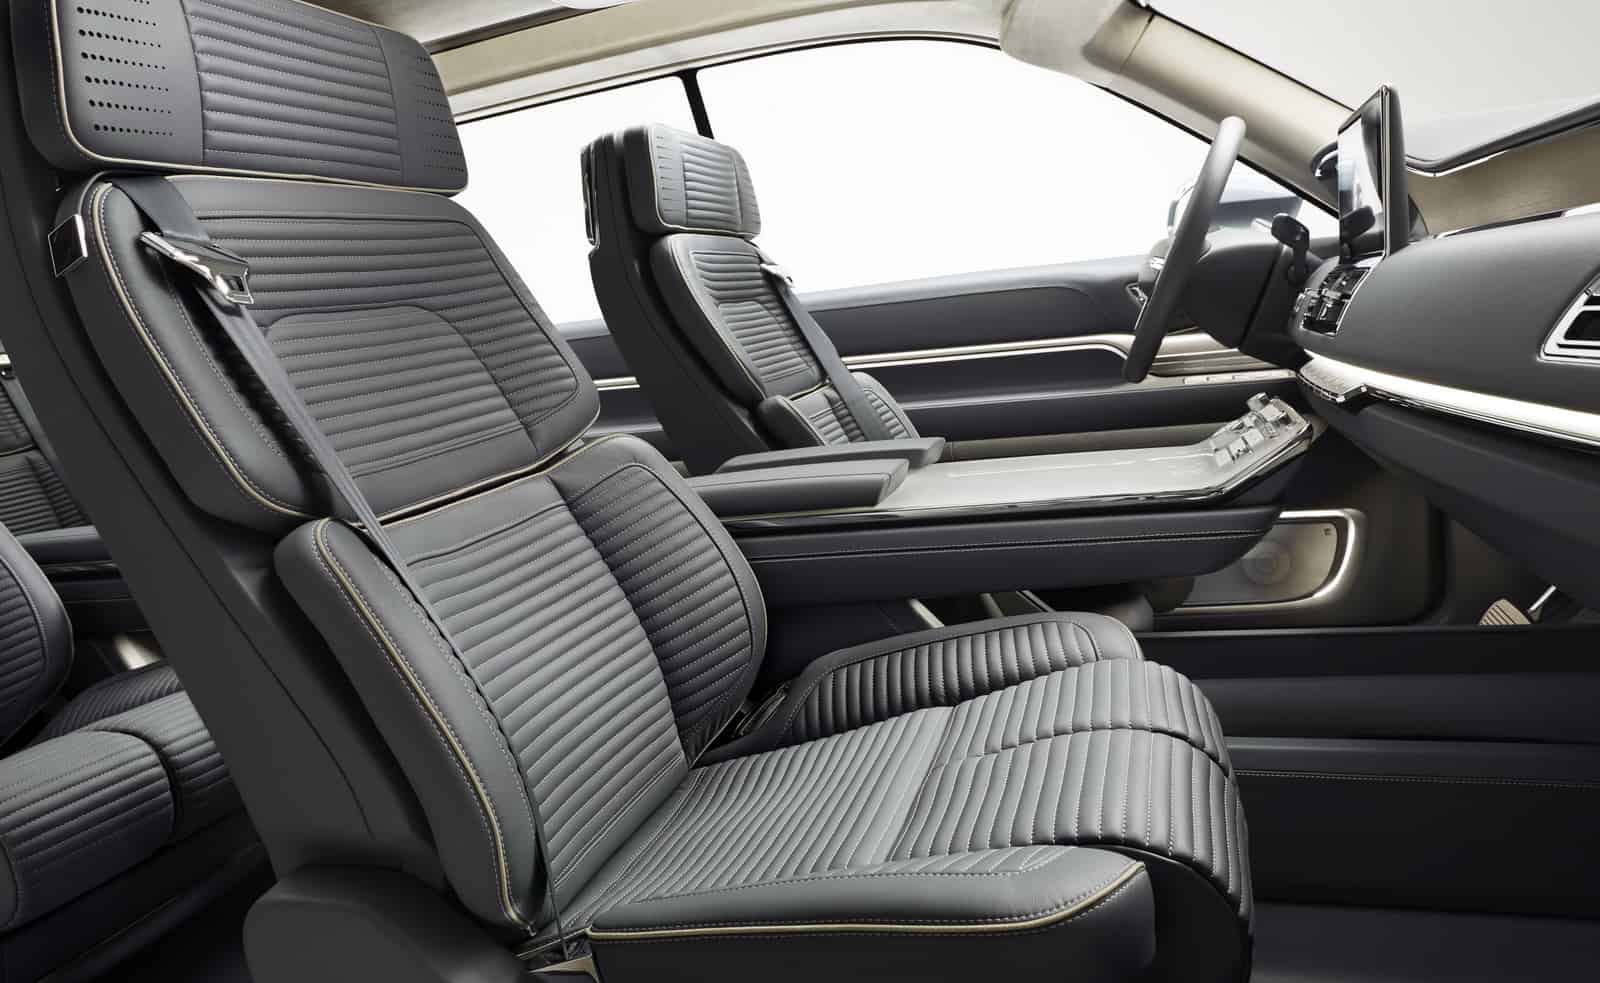 Six Lincoln Perfect Position seats adjust 30 ways to best support occupants different body types including independent thigh extensions.